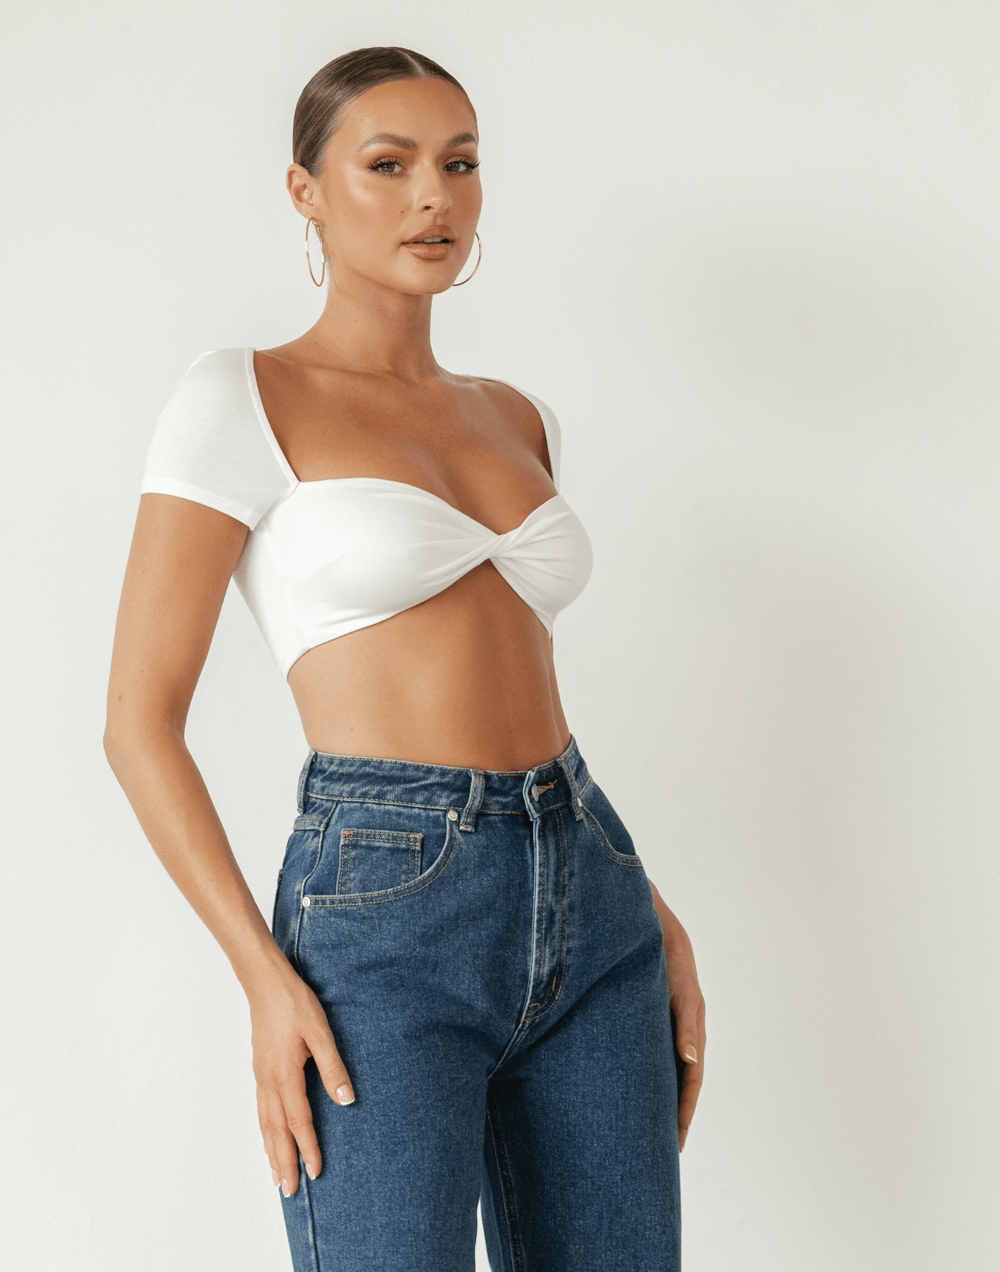 Tylah Crop Top (White) - Twisted Front Short Sleeve Crop Top - Women's Top - Charcoal Clothing